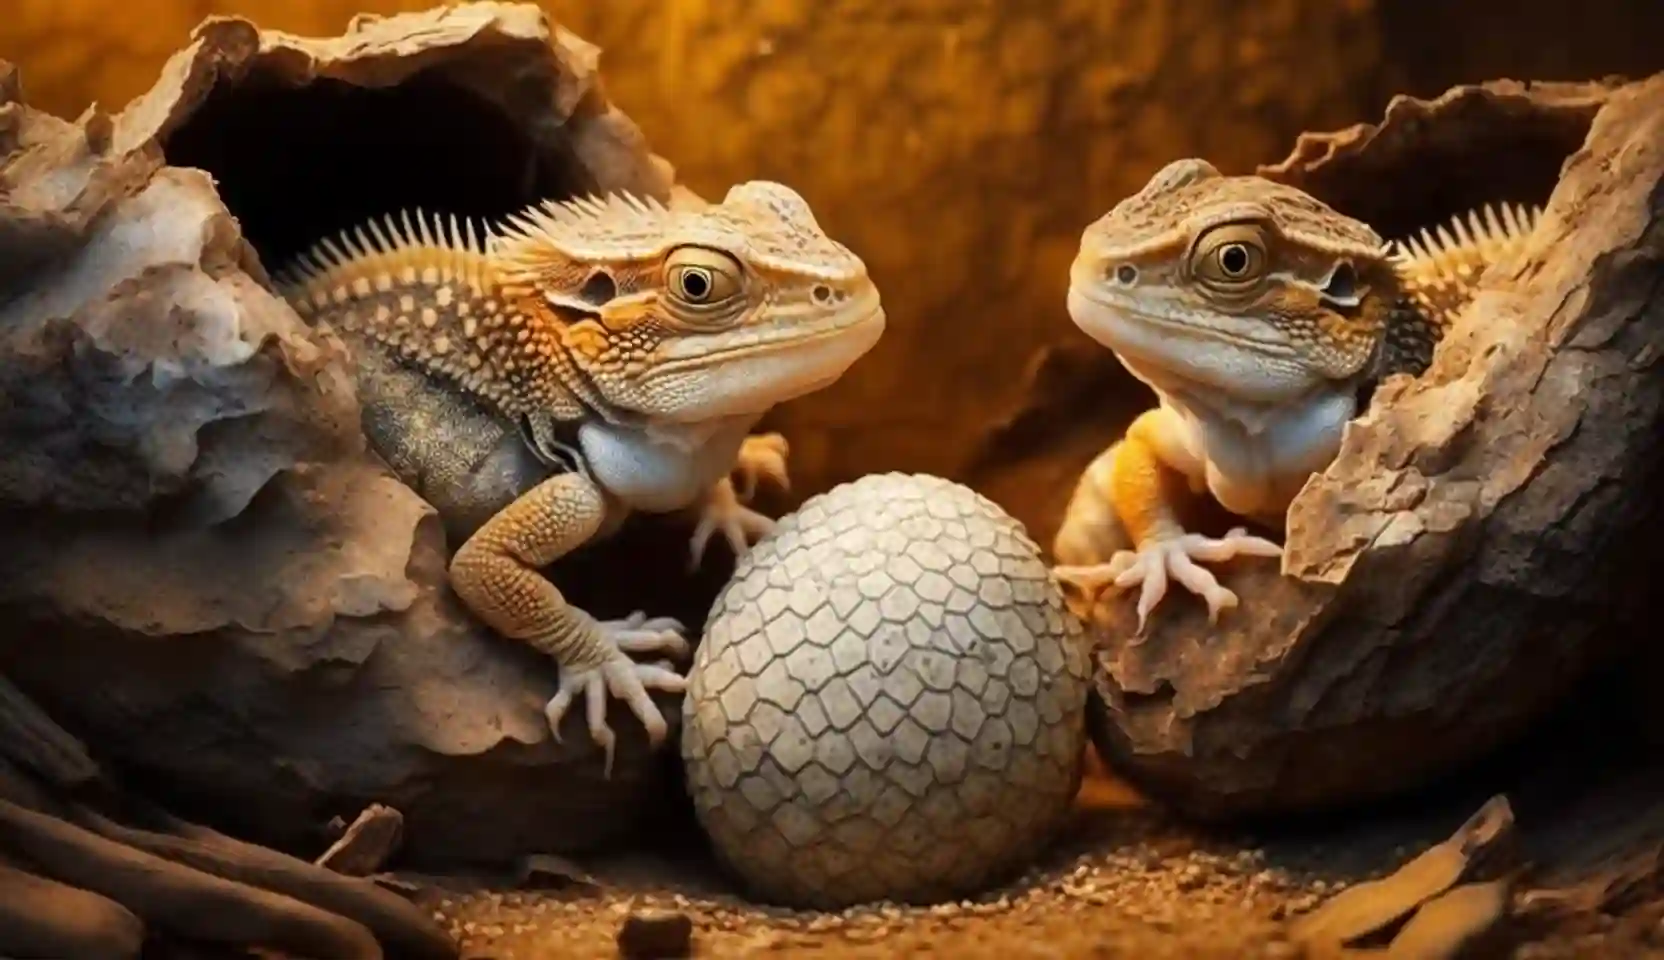 Can You Eat Bearded Dragon Eggs?